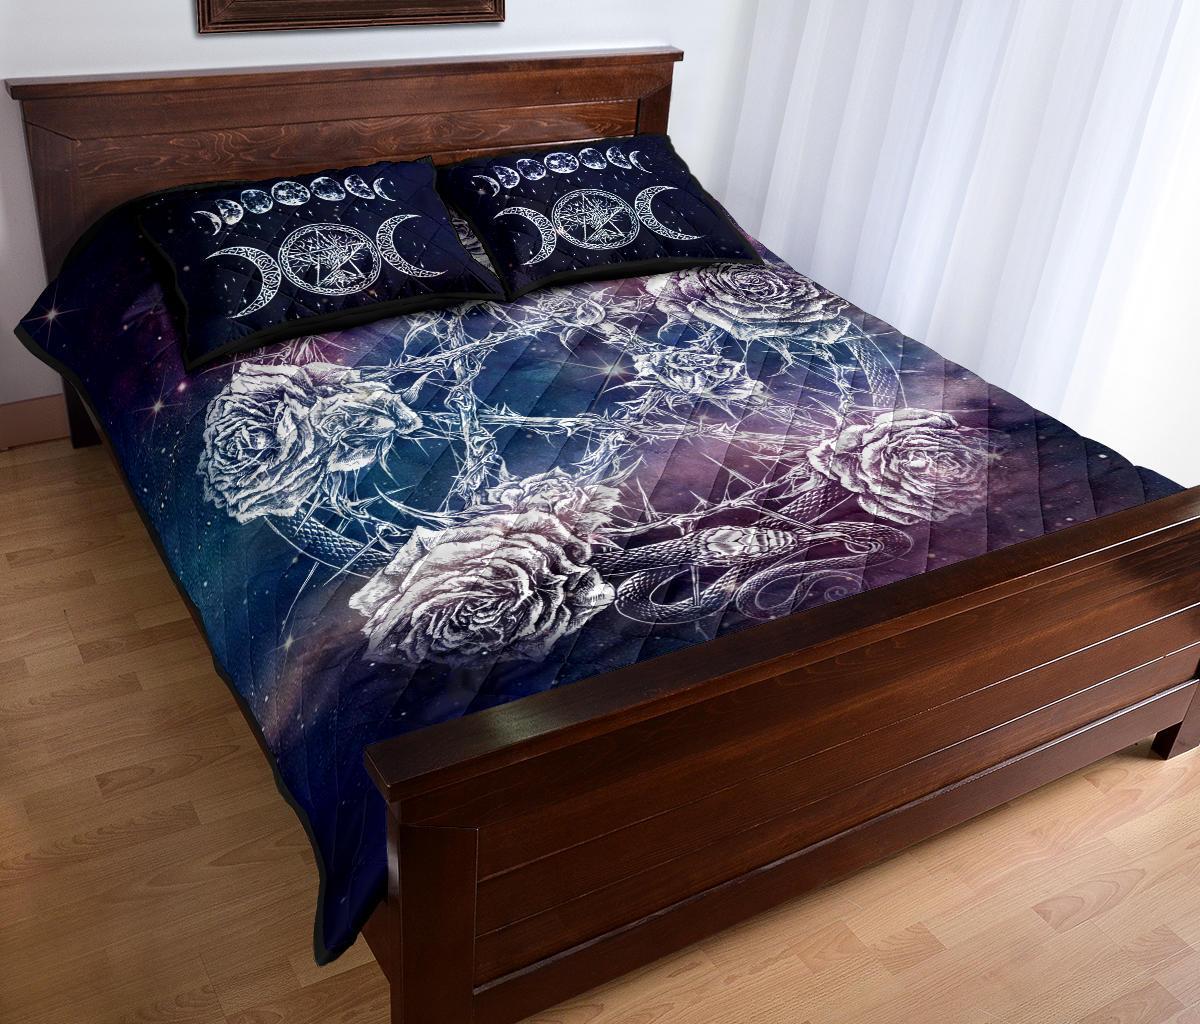 Pentacle Roses Wicca - Witch Quilt Set 0822